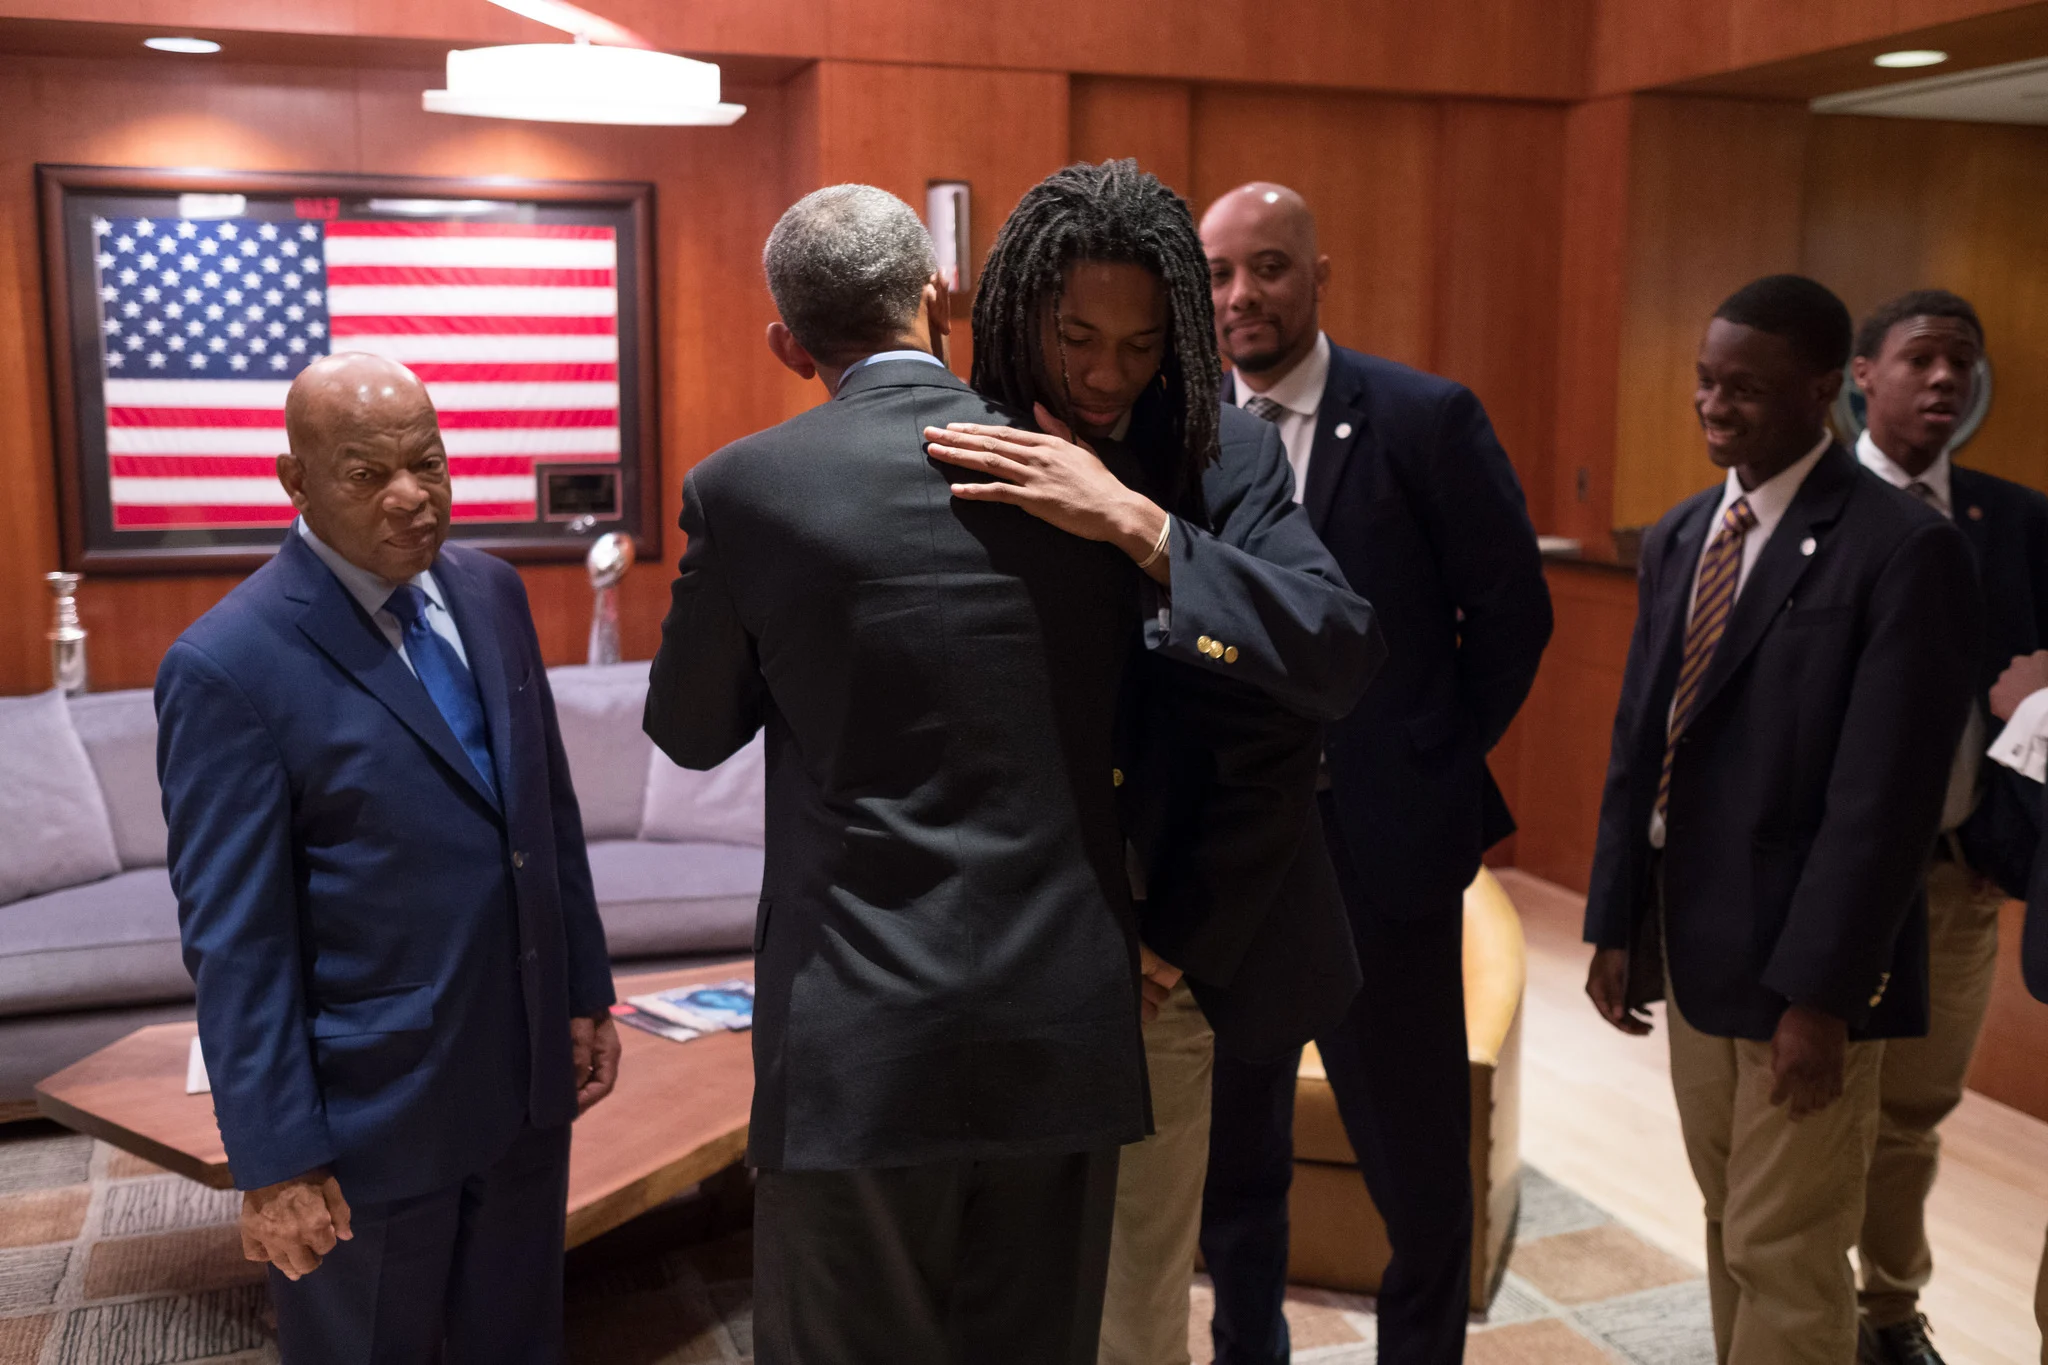 Barack Obama hugging a young man with dreads infront of other men wearing suits, all brown skin